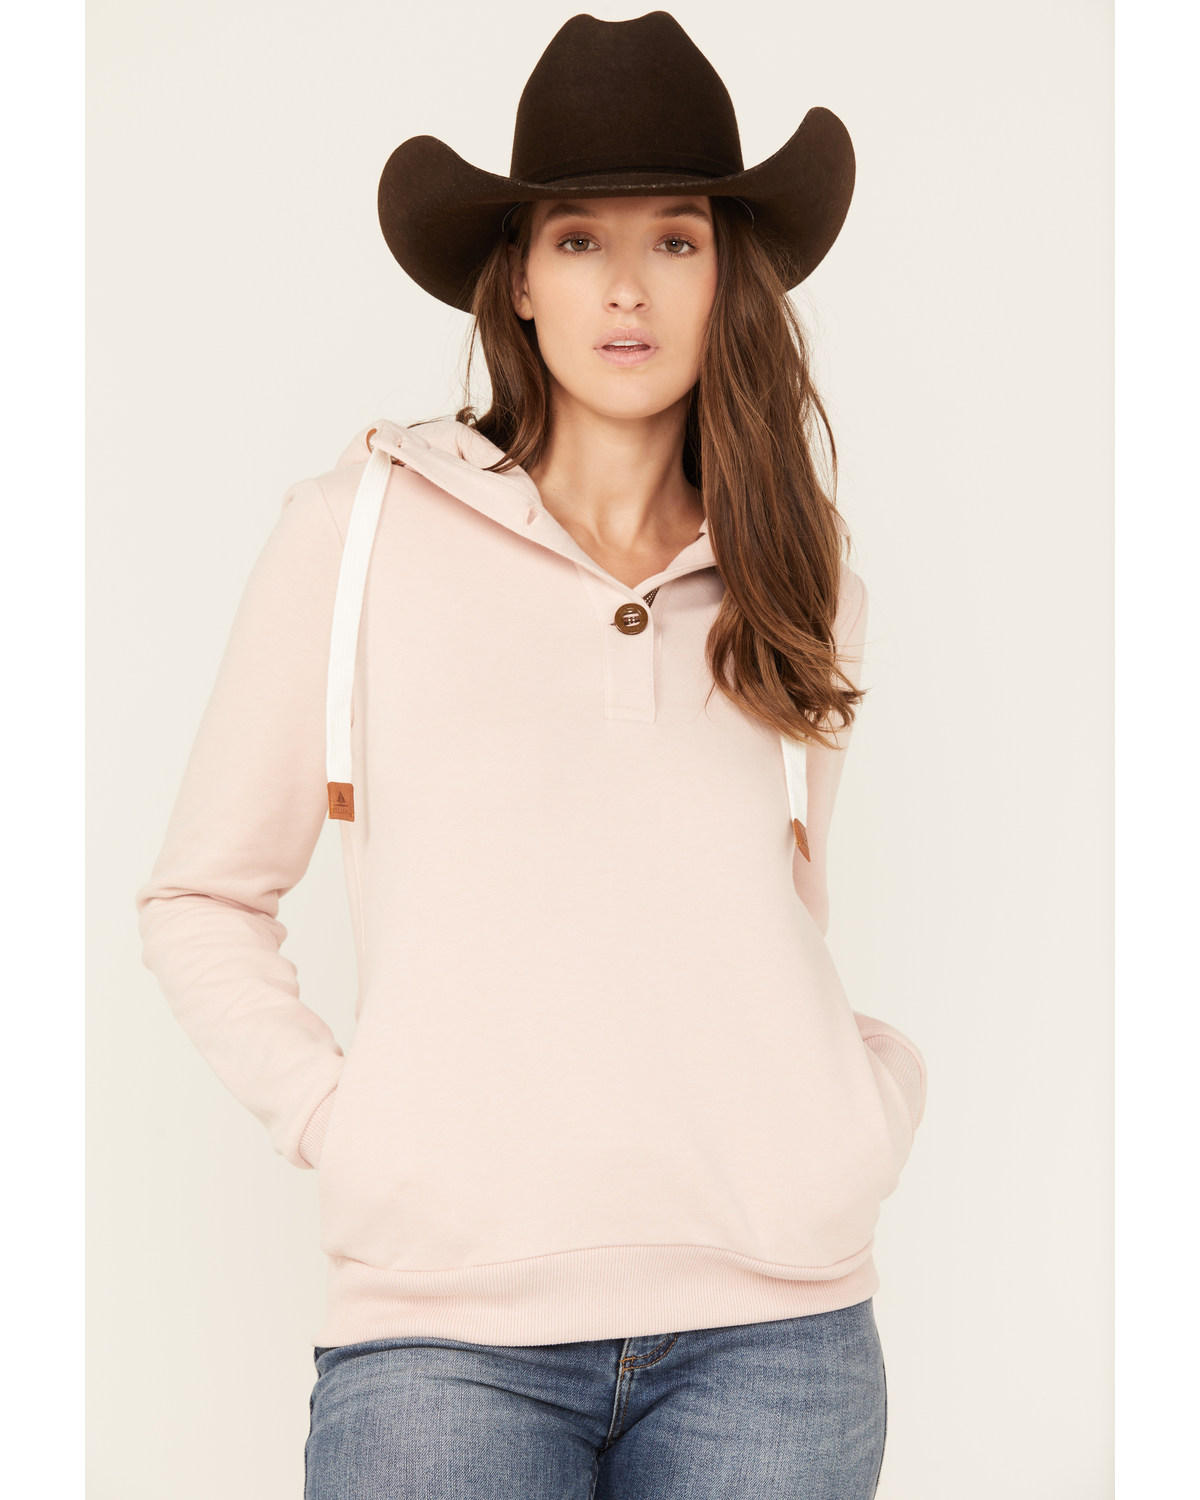 Wanakome Women's Jas Button-Down Hooded Pullover